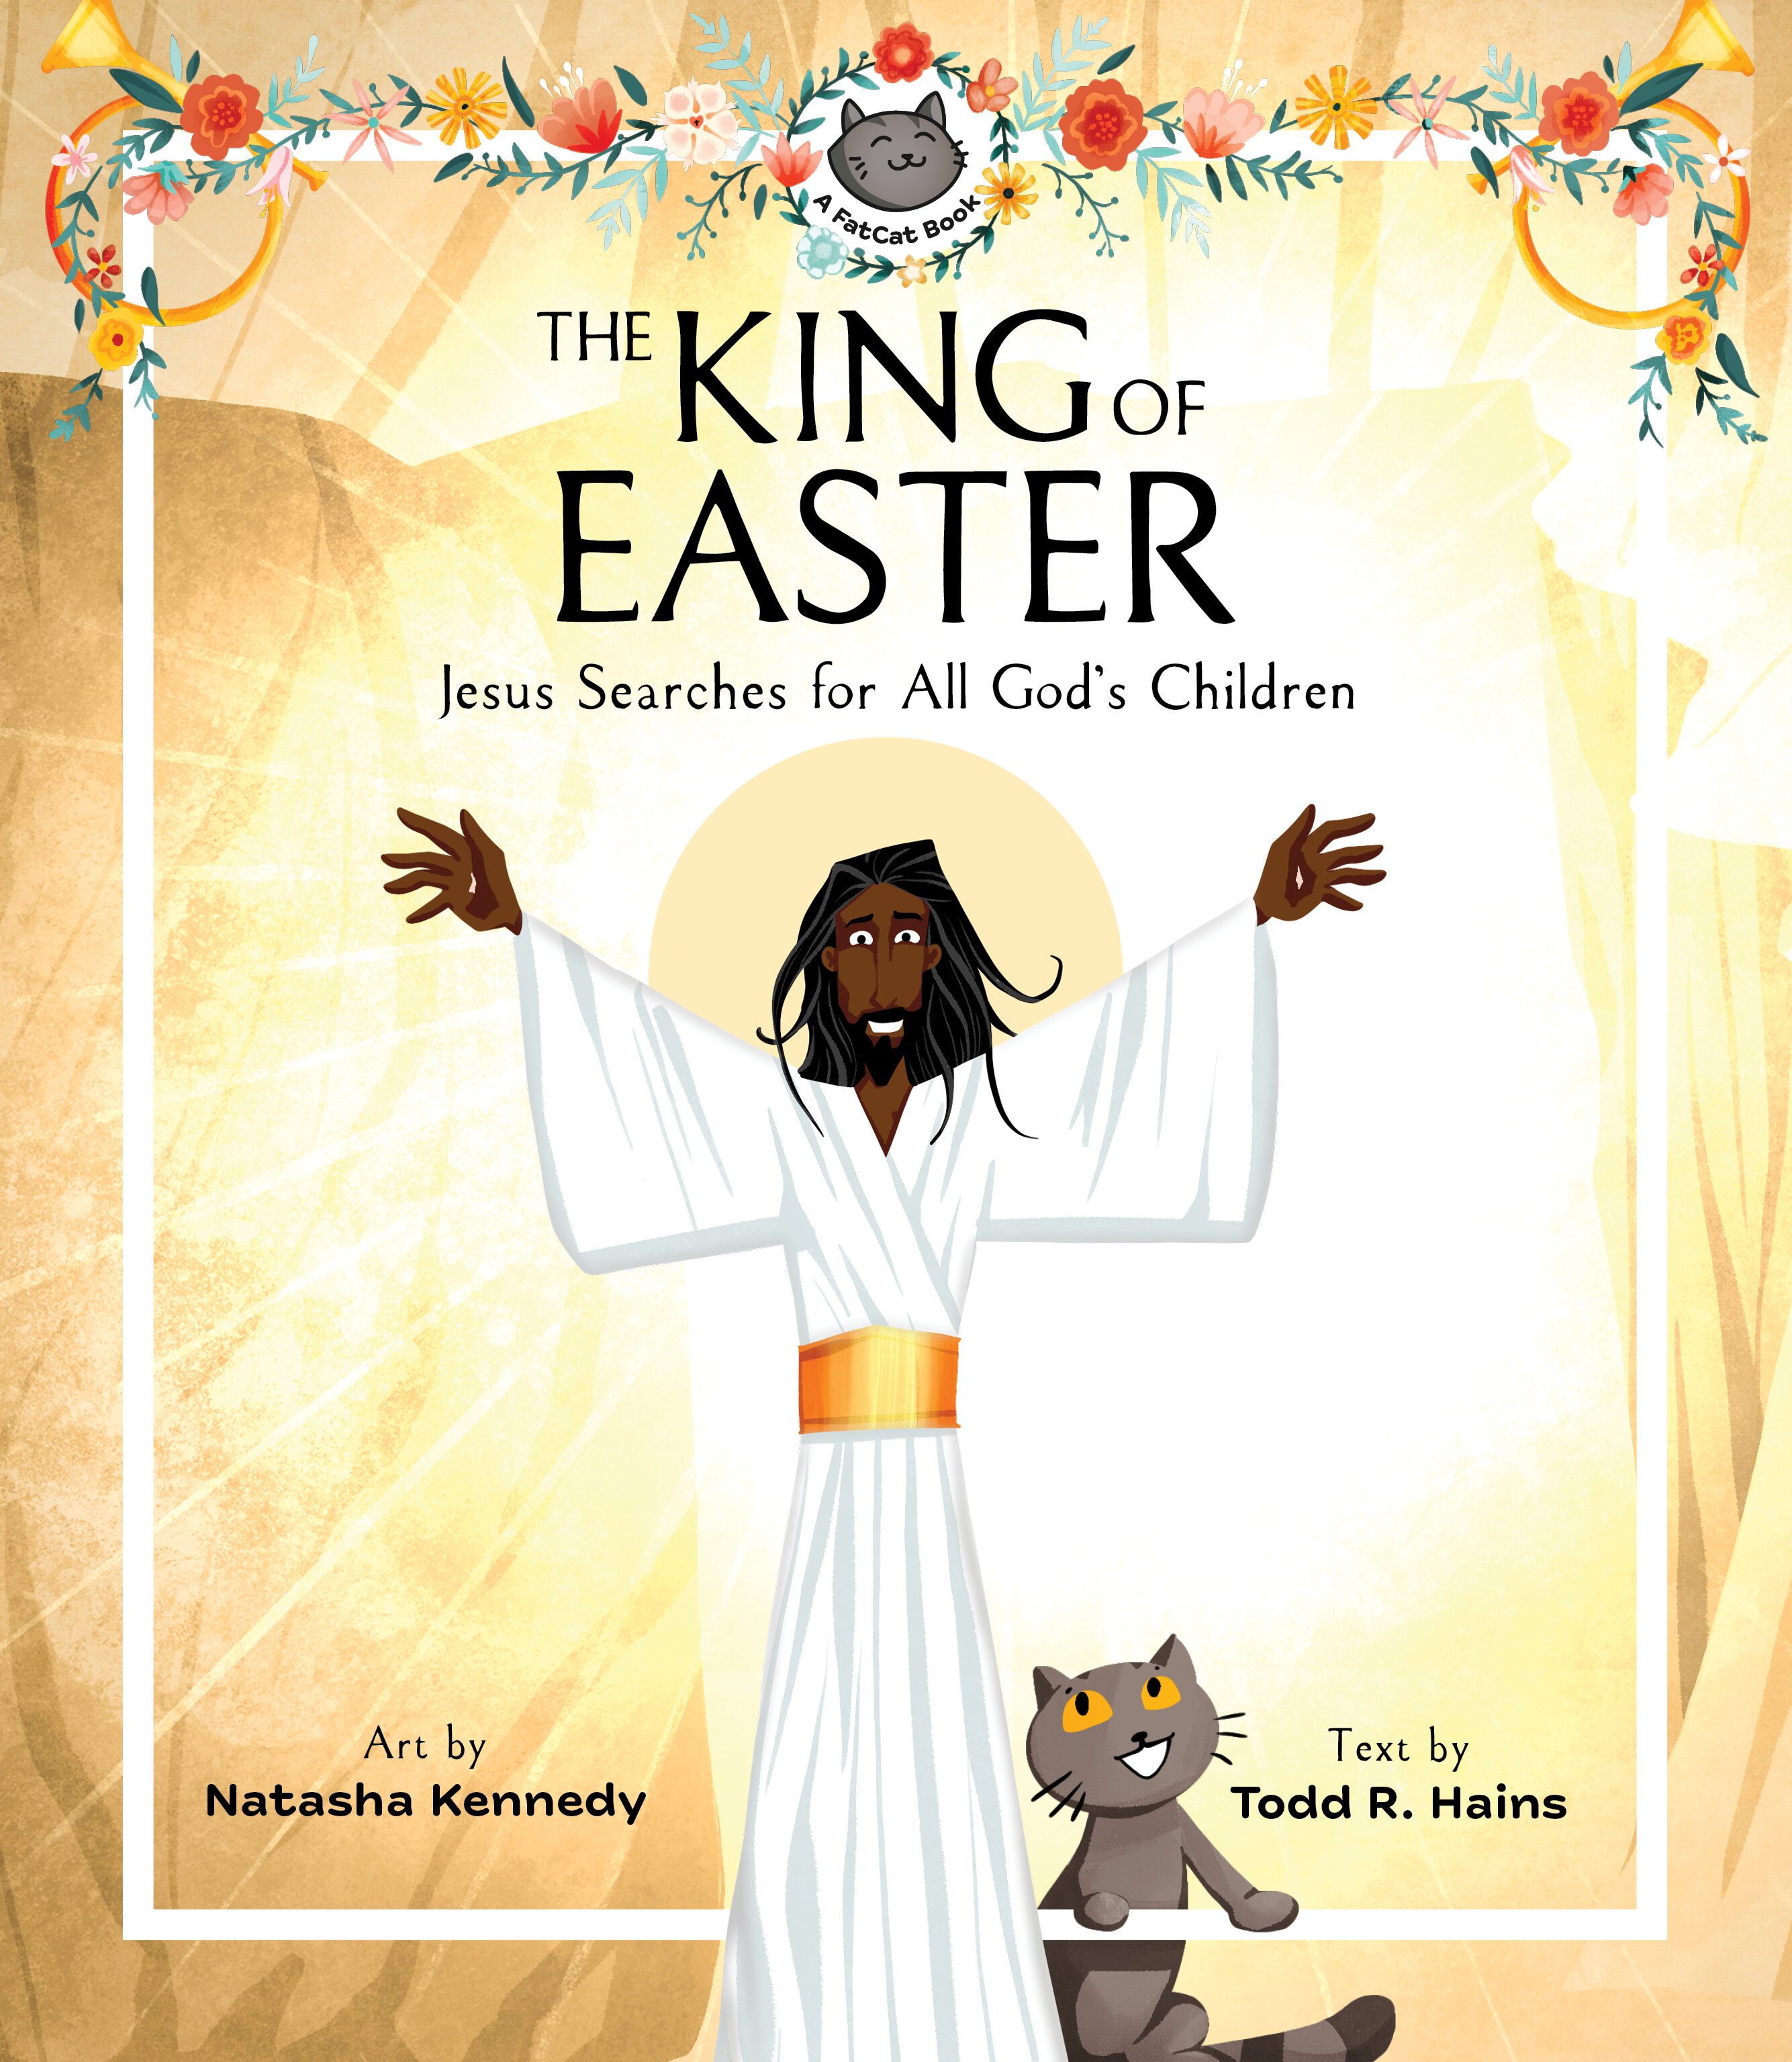 The King of Easter: Jesus Searches for All God’s Children (A FatCat Book)